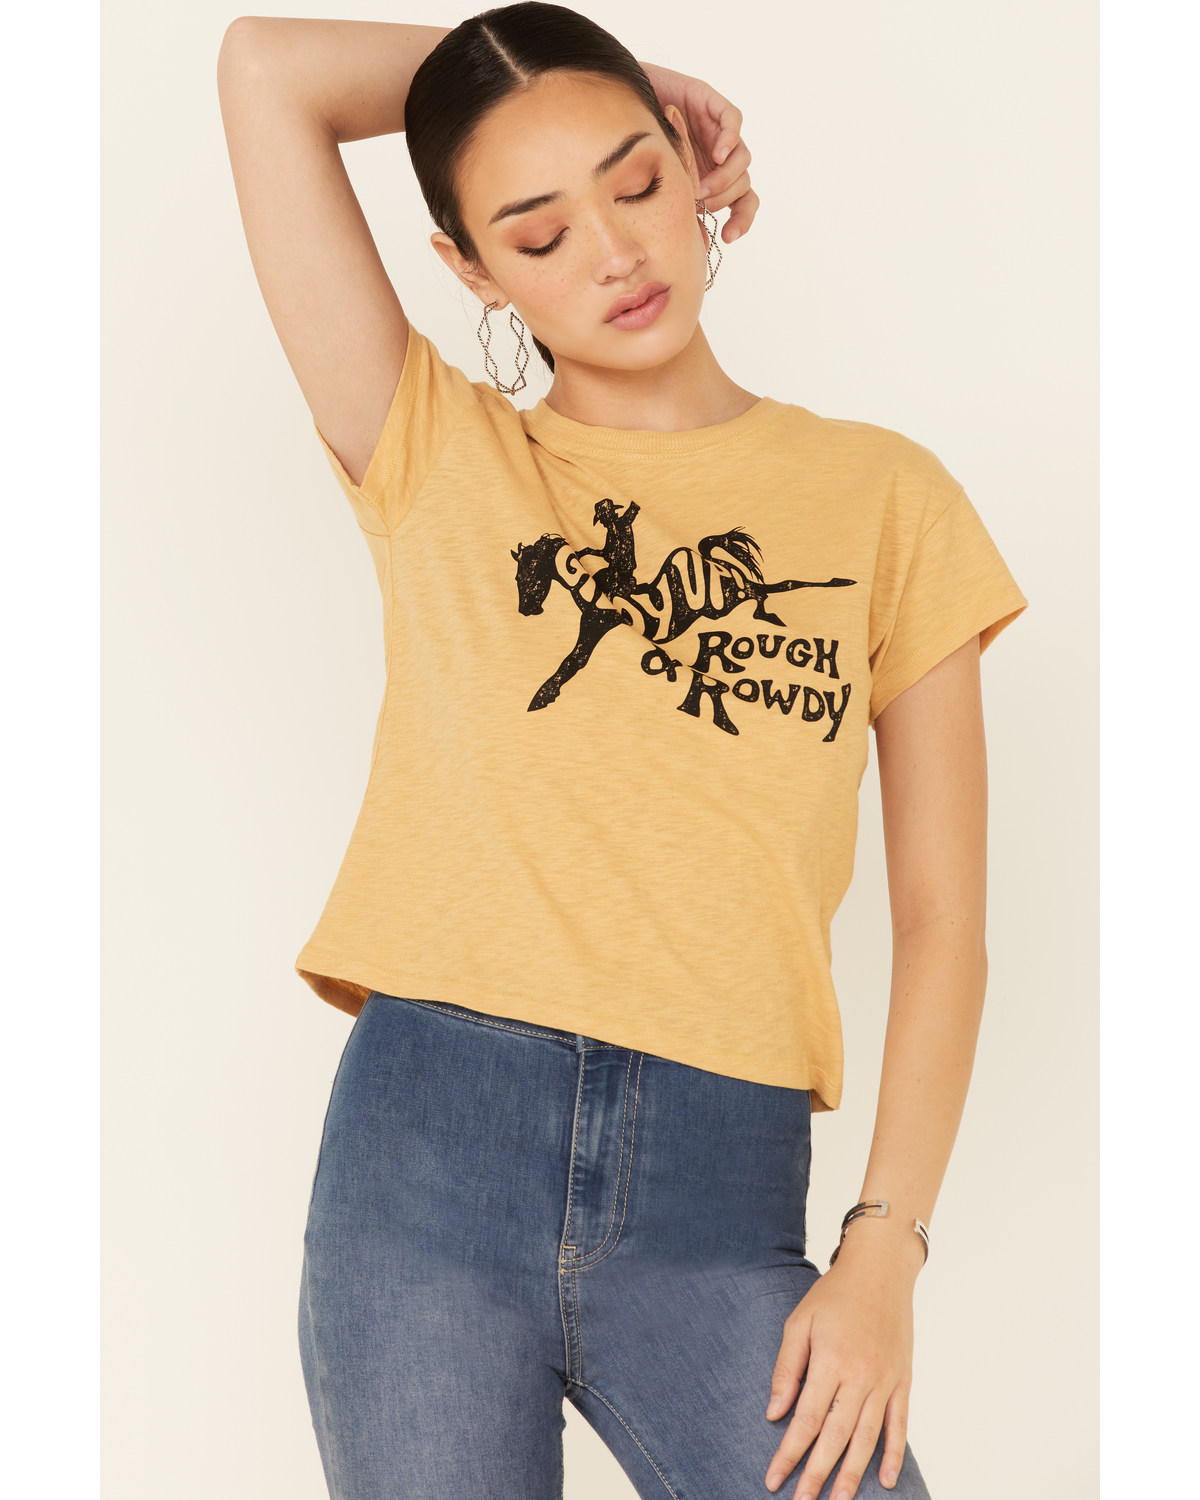 White Crow Women's Giddy Up Rough & Rowdy Graphic Short Sleeve Crop Tee